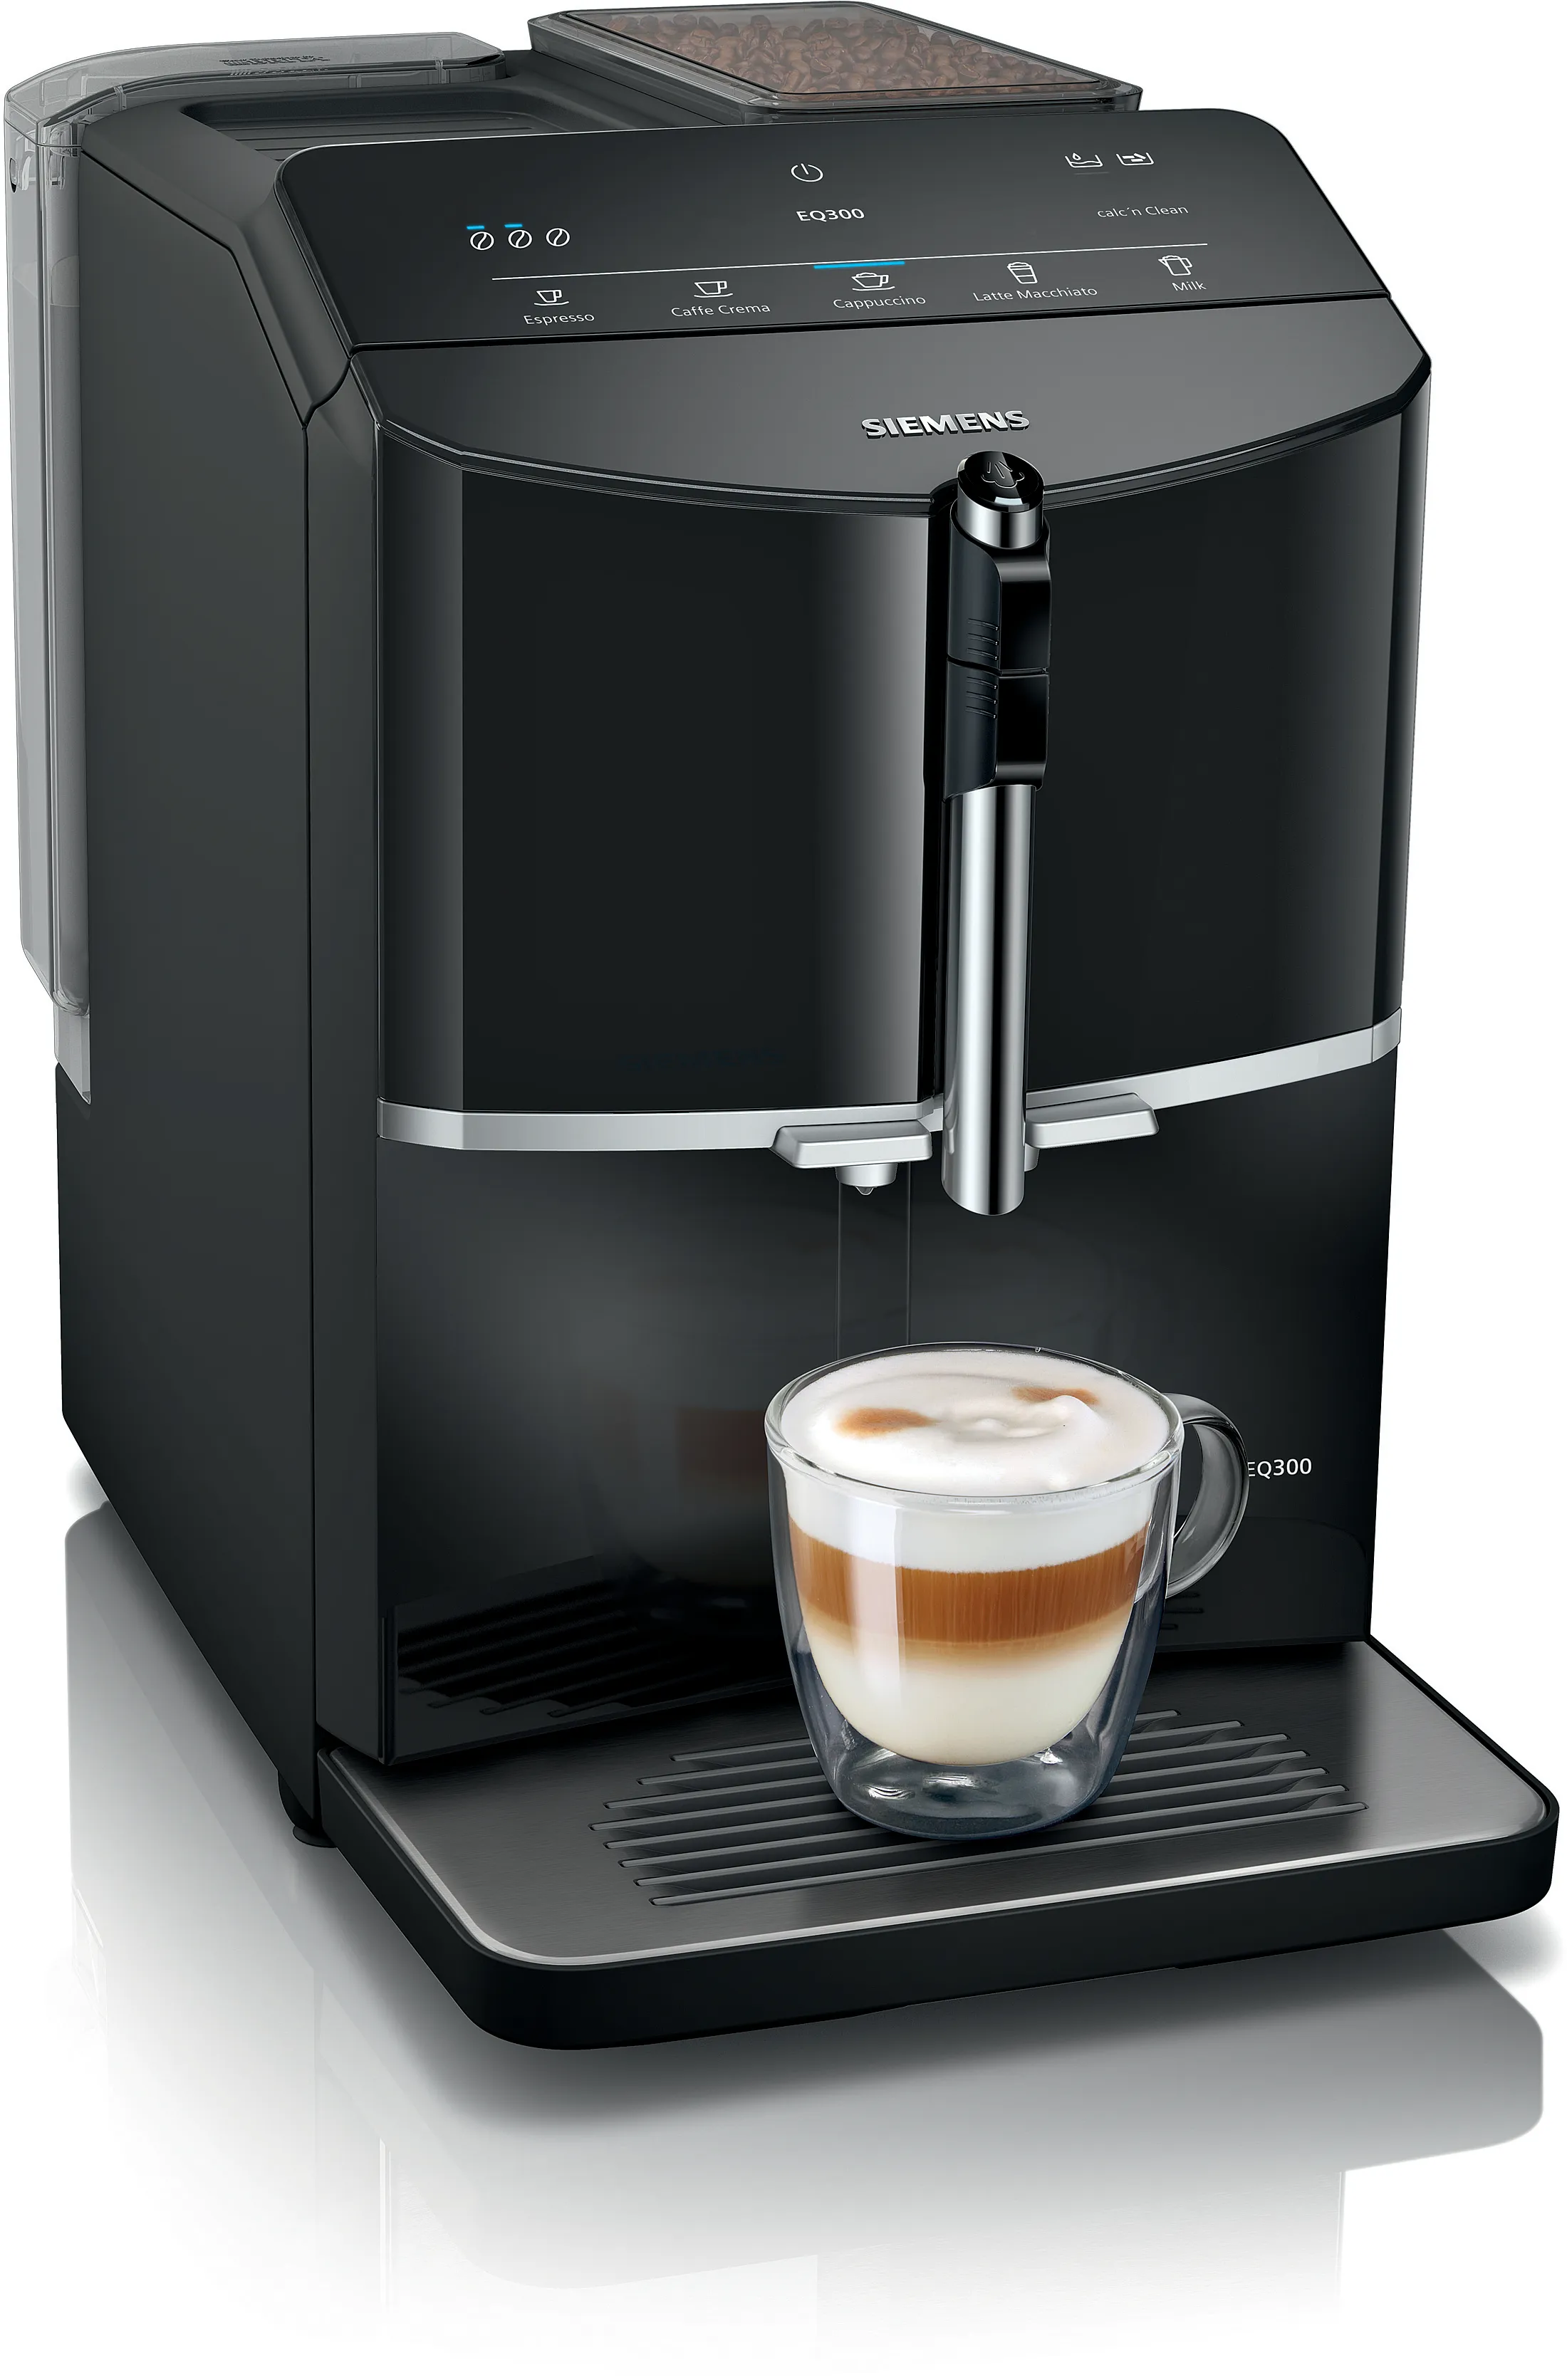 Fully automatic coffee machine EQ300 Piano black, Removable water tank 